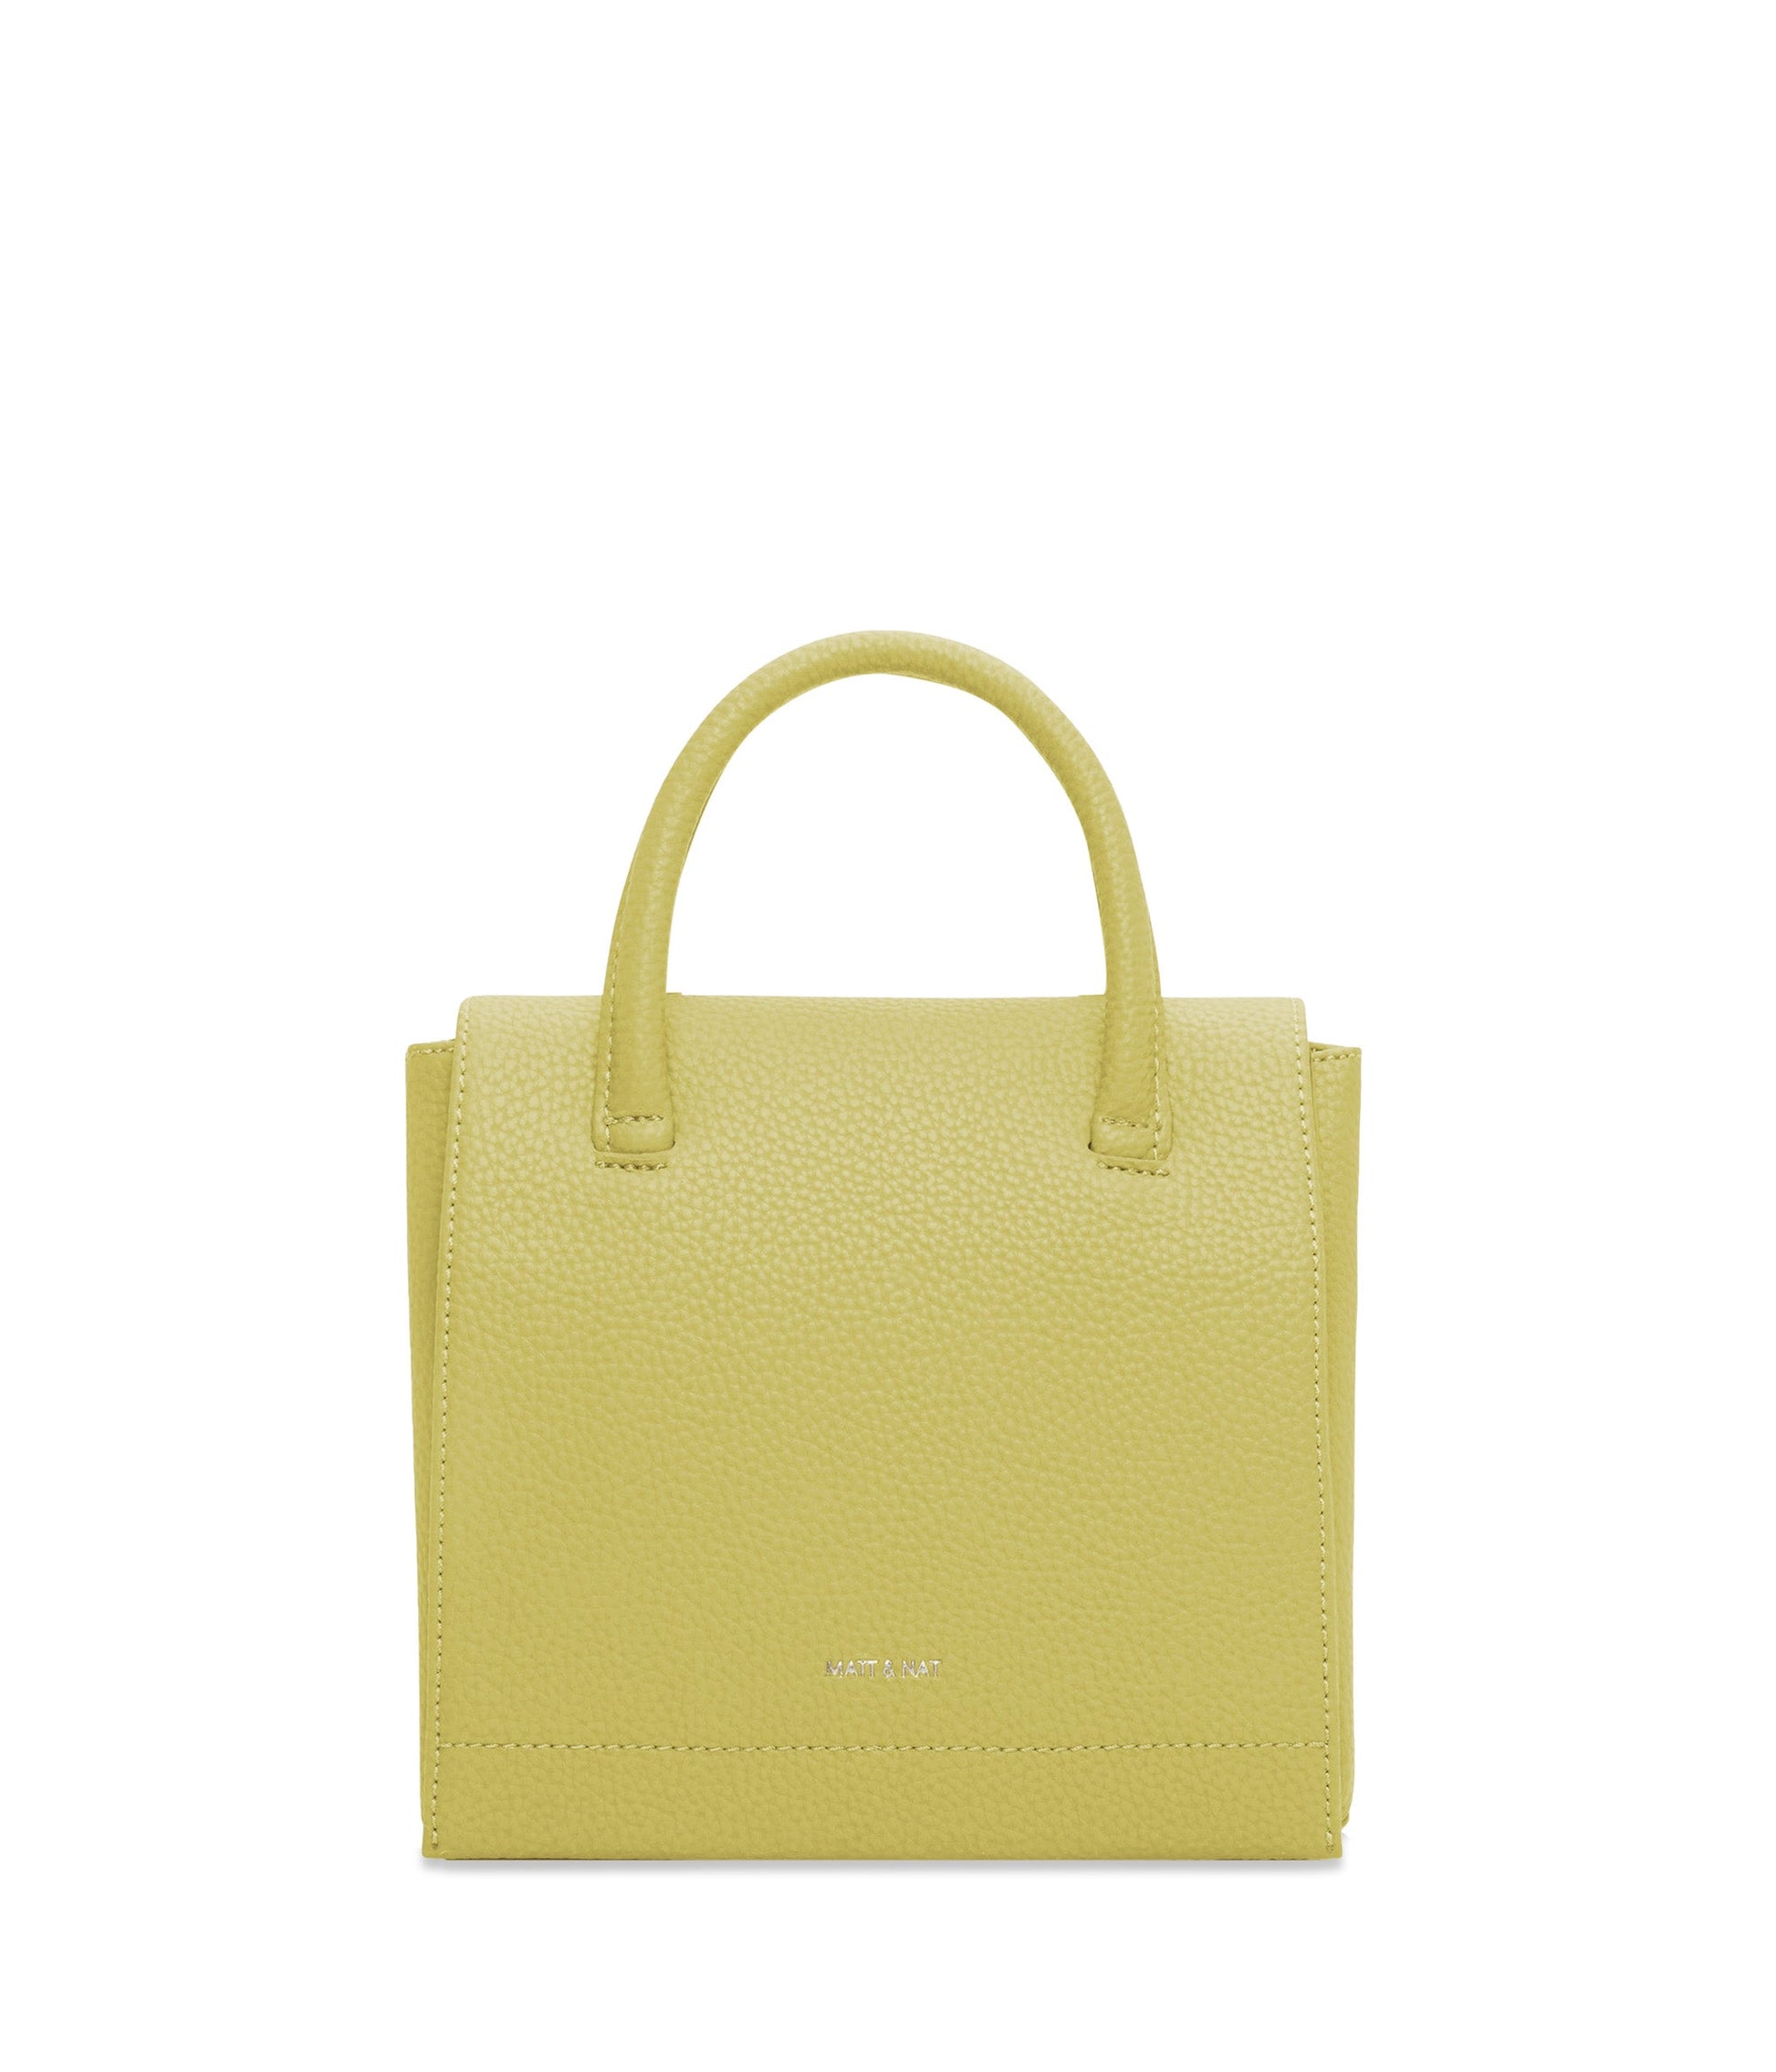 ADELSM Small Vegan Satchel - Purity | Color: Green - variant::pear